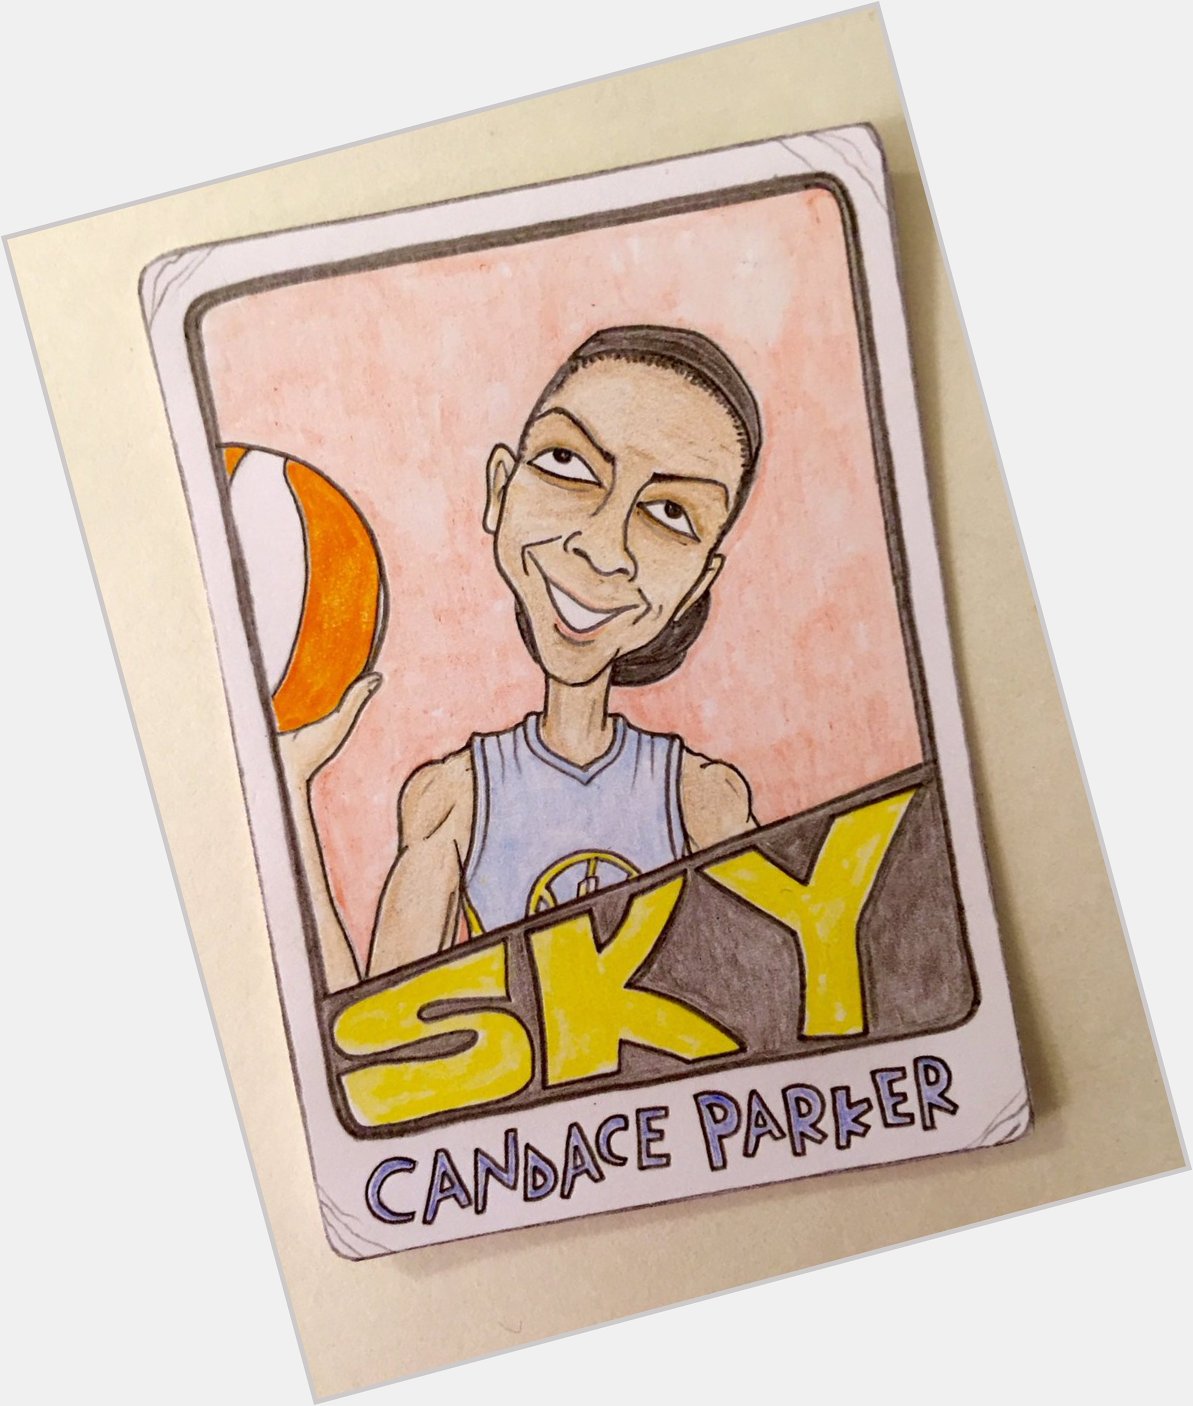 Happy birthday, Candace Parker! 